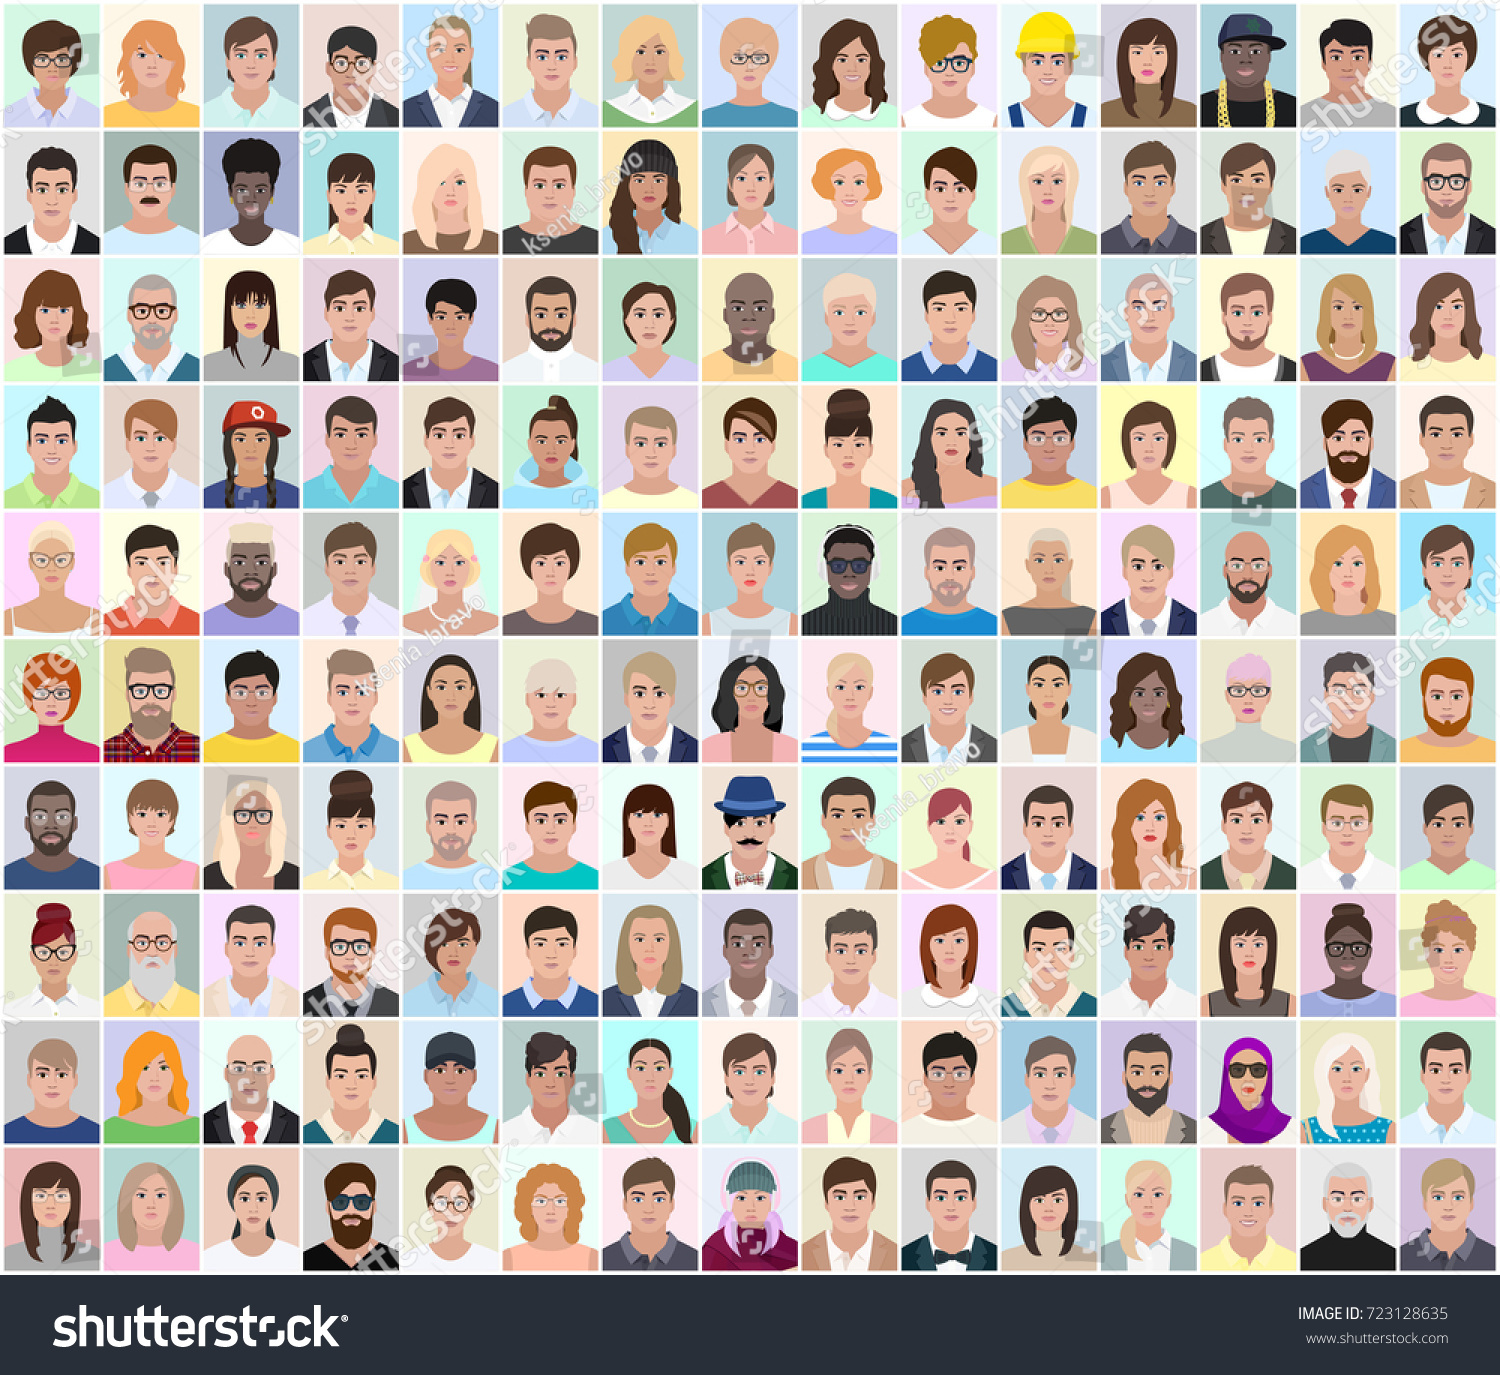 Portraits of different people, light background, detailed drawing, vector illustration #723128635